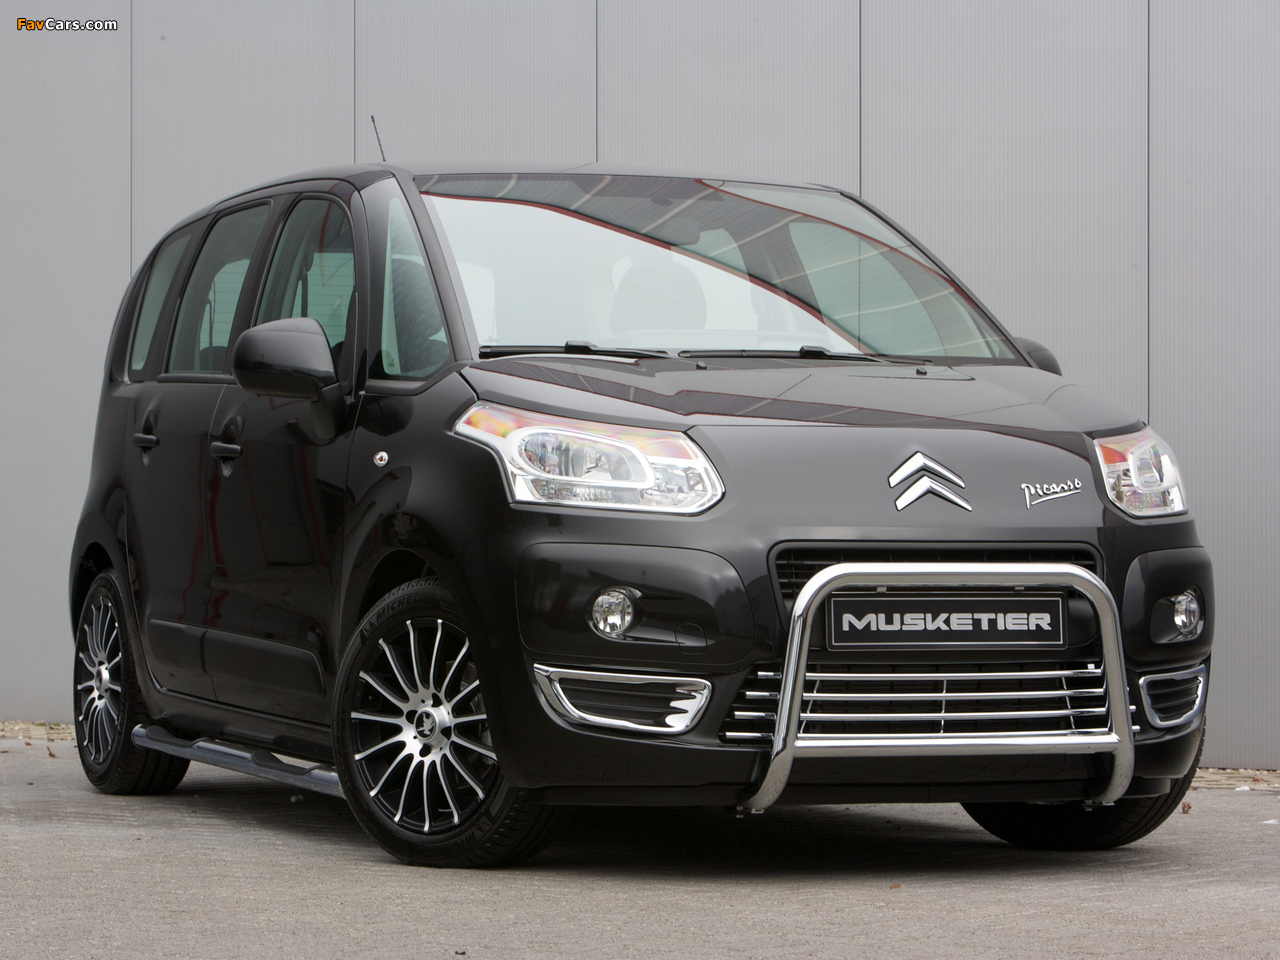 Images of Musketier Citroën C3 Picasso 2009 (1280 x 960)